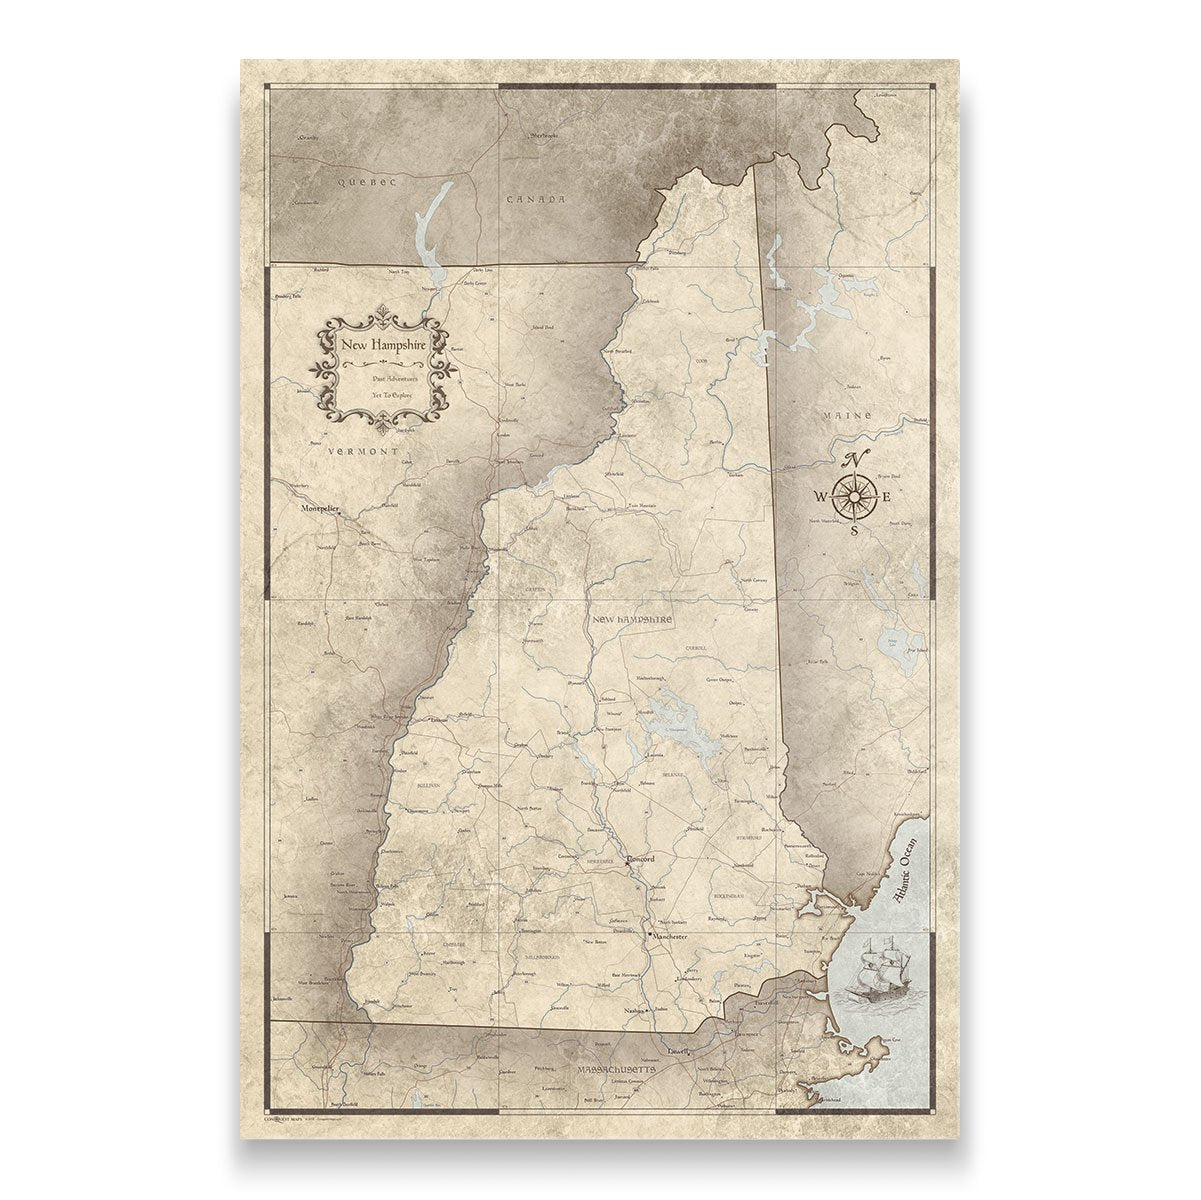 New Hampshire Poster Maps